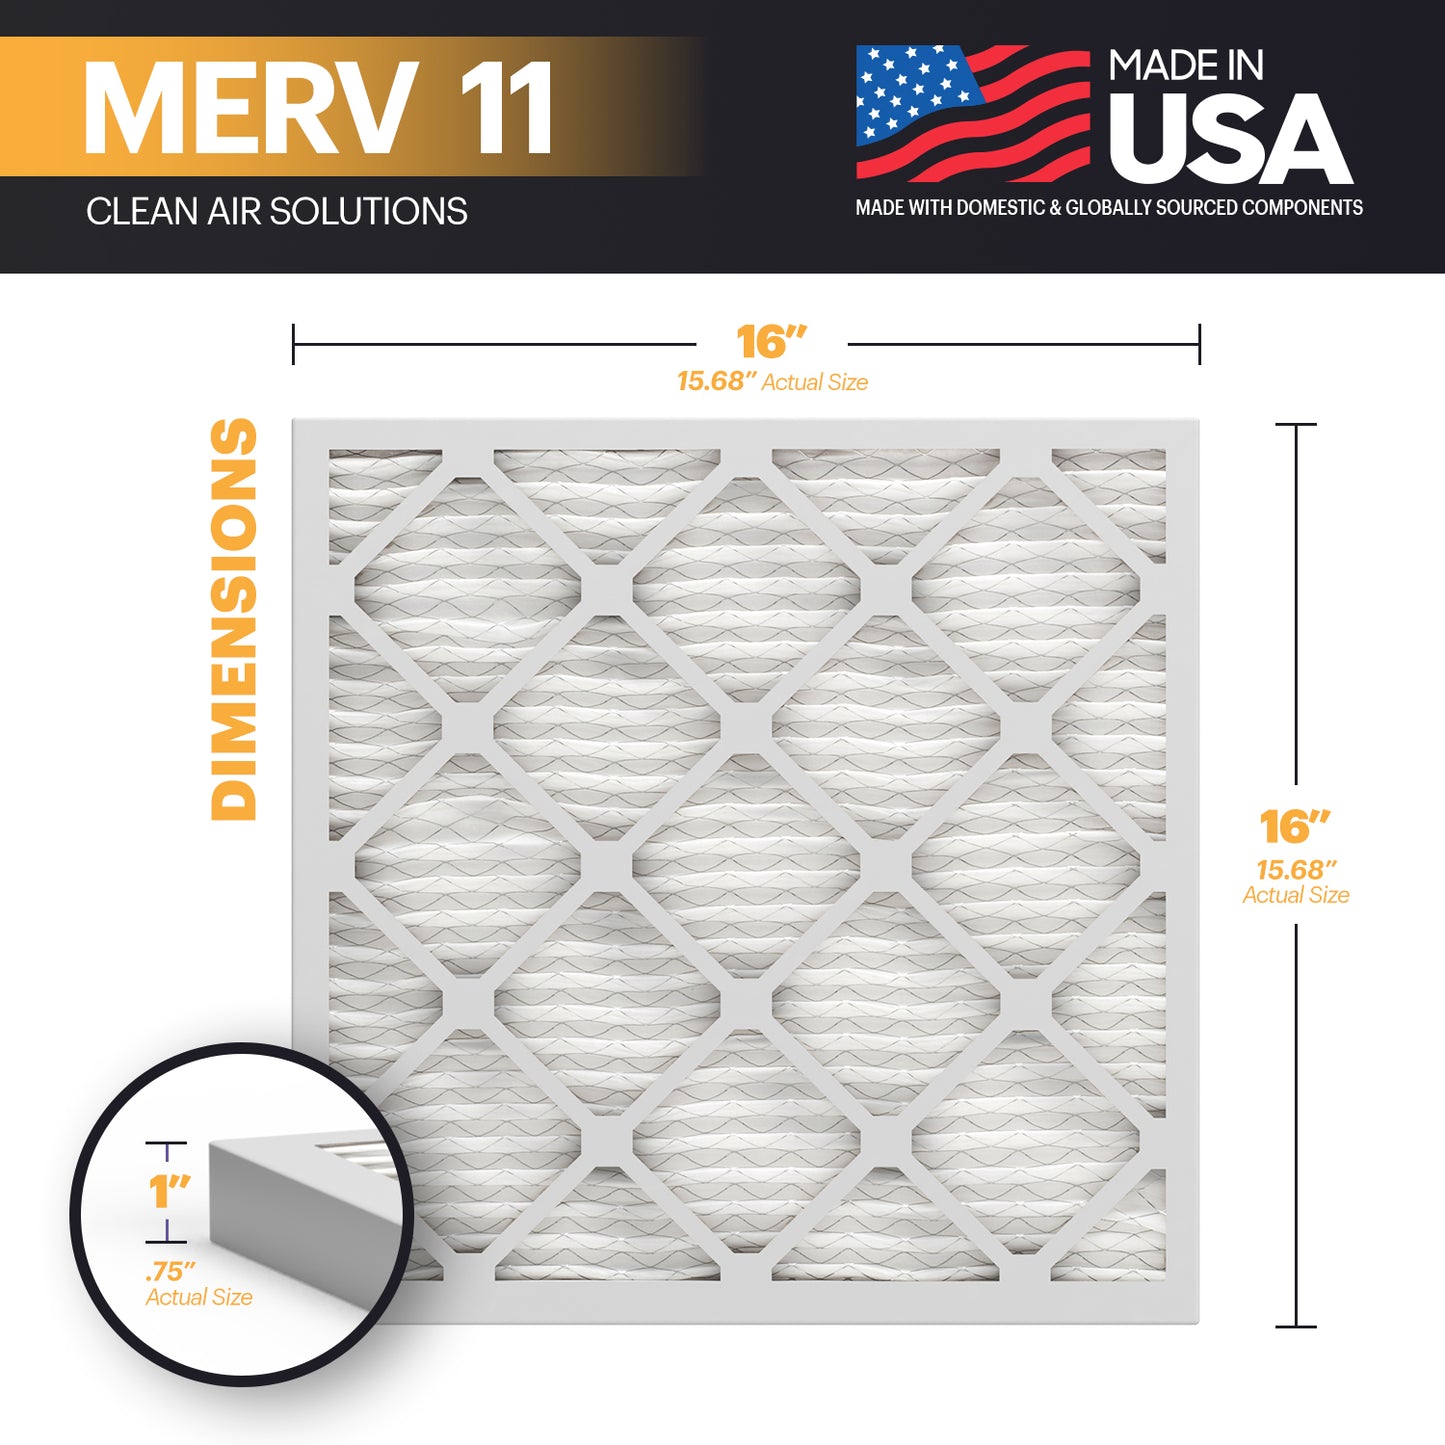 BNX TruFilter 16x16x1 MERV 11 Air Filter 6 Pack - MADE IN USA - Electrostatic Pleated Air Conditioner HVAC AC Furnace Filters - Removes Dust, Mold, Pollen, Lint, Pet Dander, Smoke, Smog